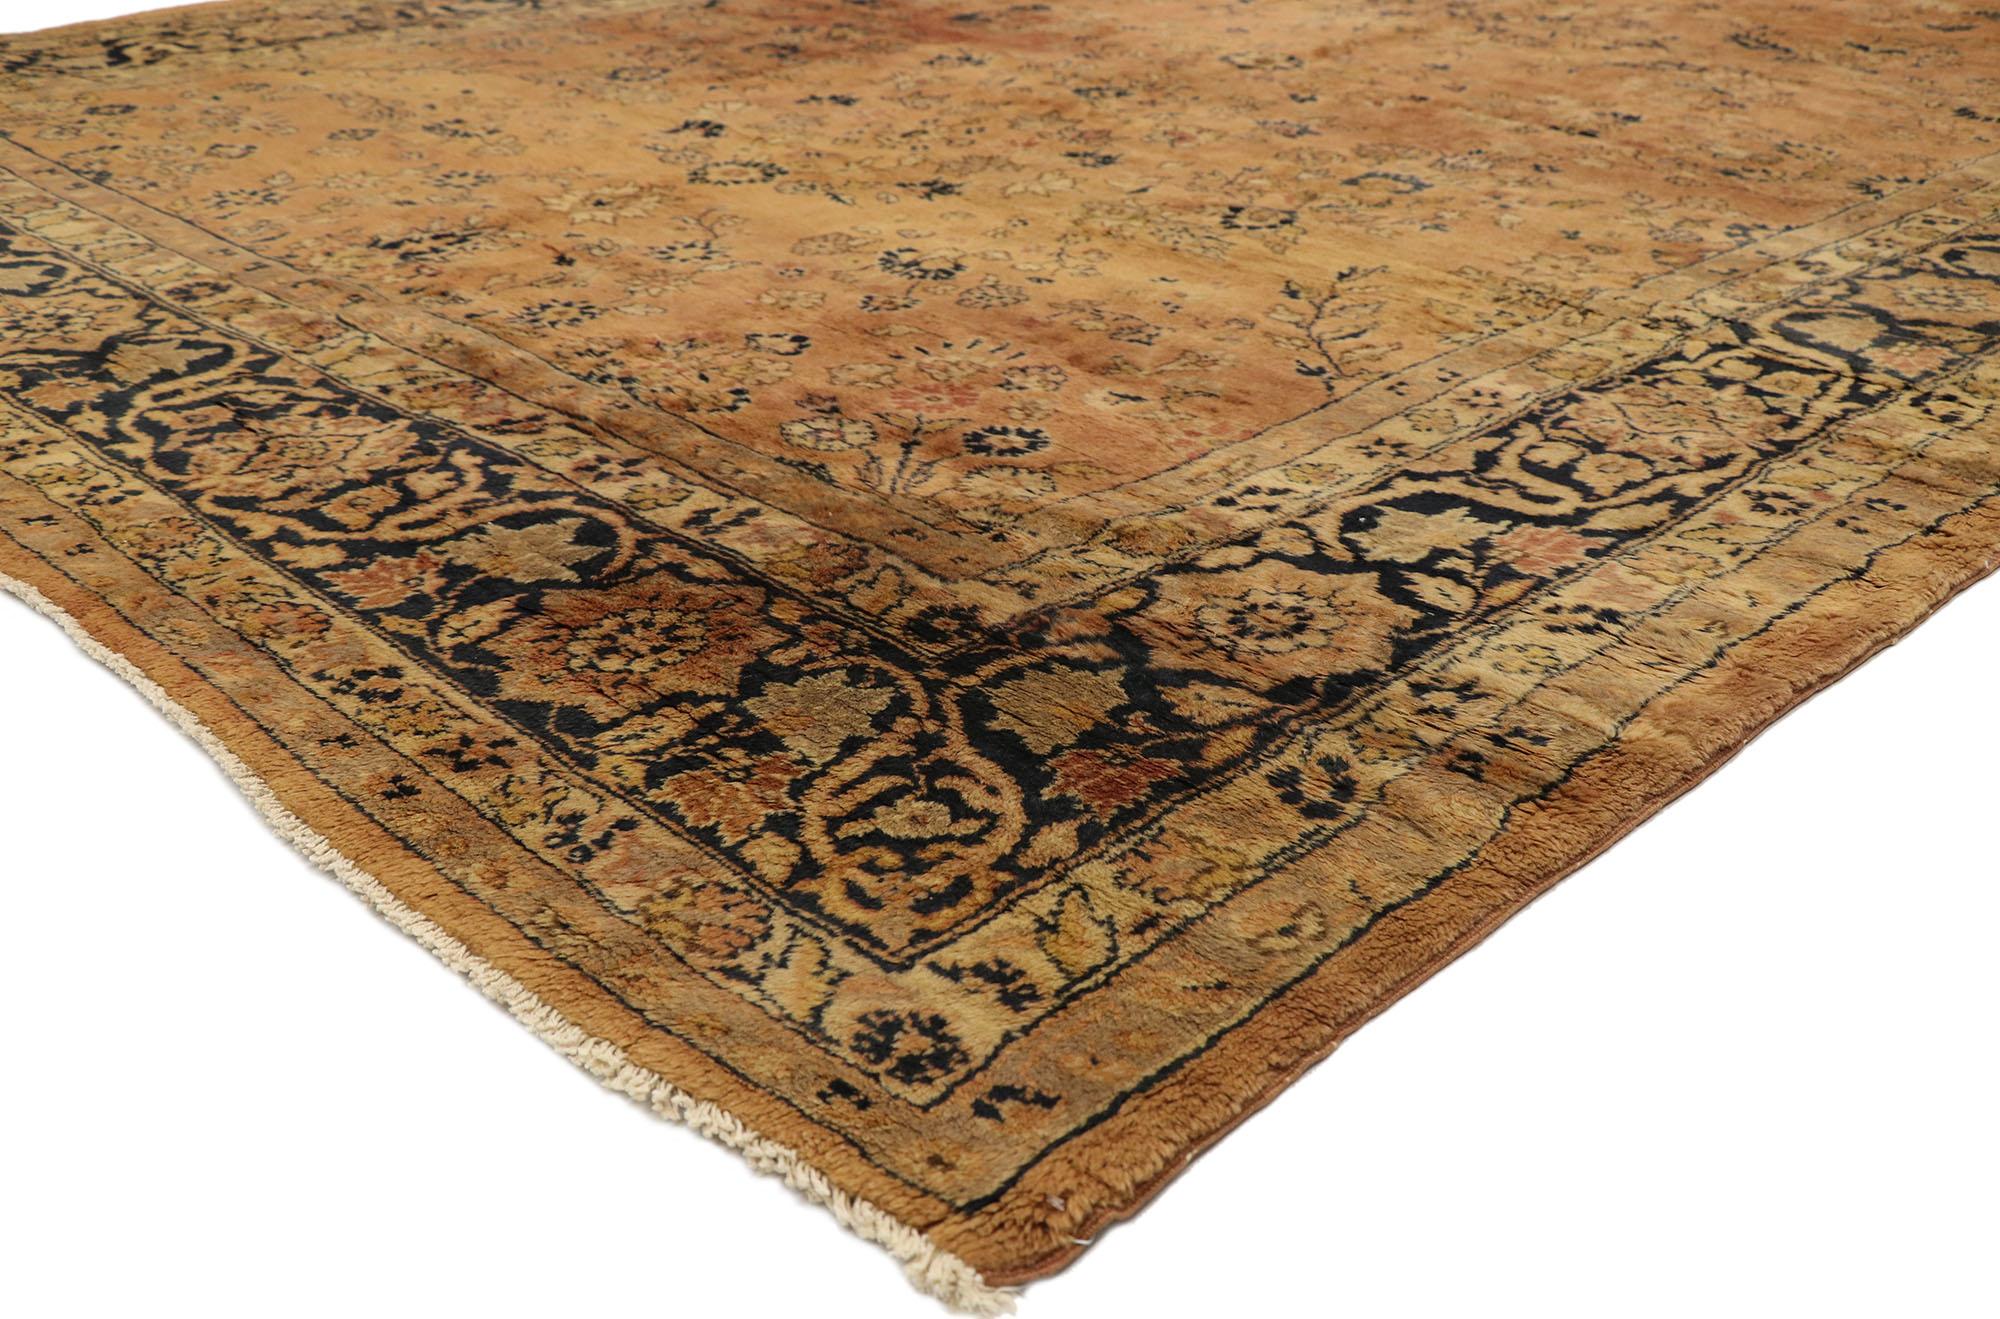 71695 Vintage Turkish Sparta Rug with Warm Rustic Italian Mediterranean Style  09'00 x 14'09. Emanating timeless elegance and warm, earthy colors, this hand knotted wool vintage Turkish Sparta rug beautifully embodies a modern Mediterranean style